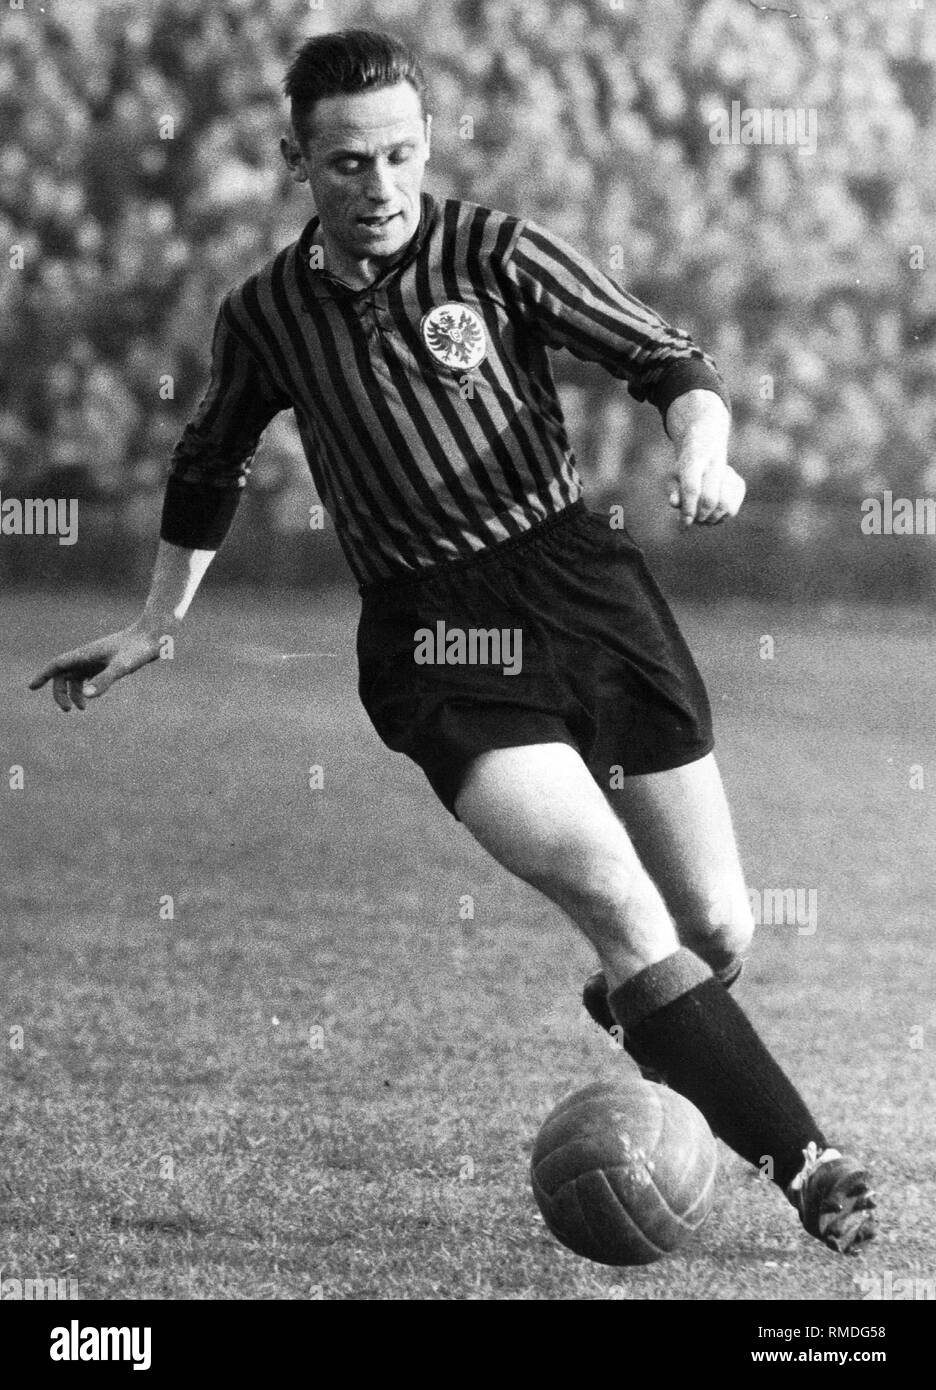 Alfred Pfaff, international and player of the Eintracht Frankfurt. Here, playing in the jersey of the Eintracht Frankfurt. Stock Photo